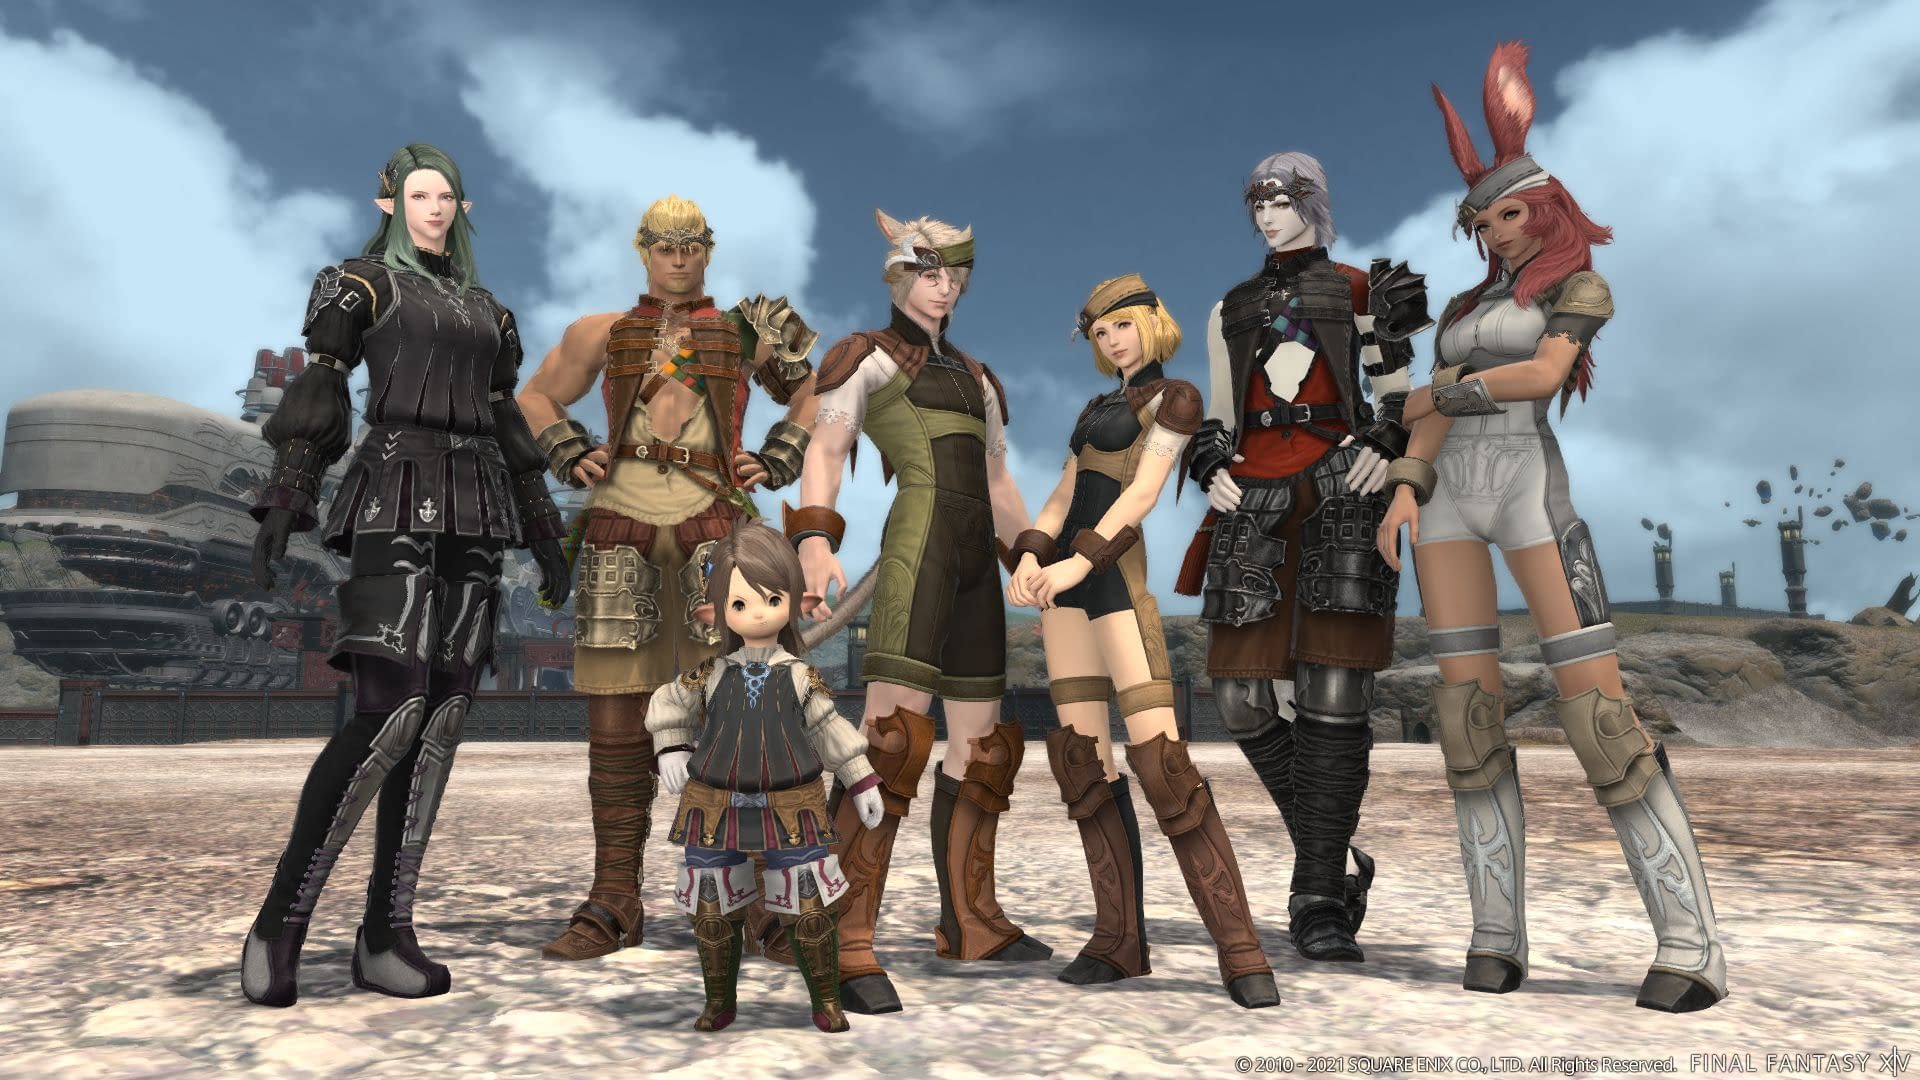 Final Fantasy Xiv Online Launches Ps5 Version Patch 5 55